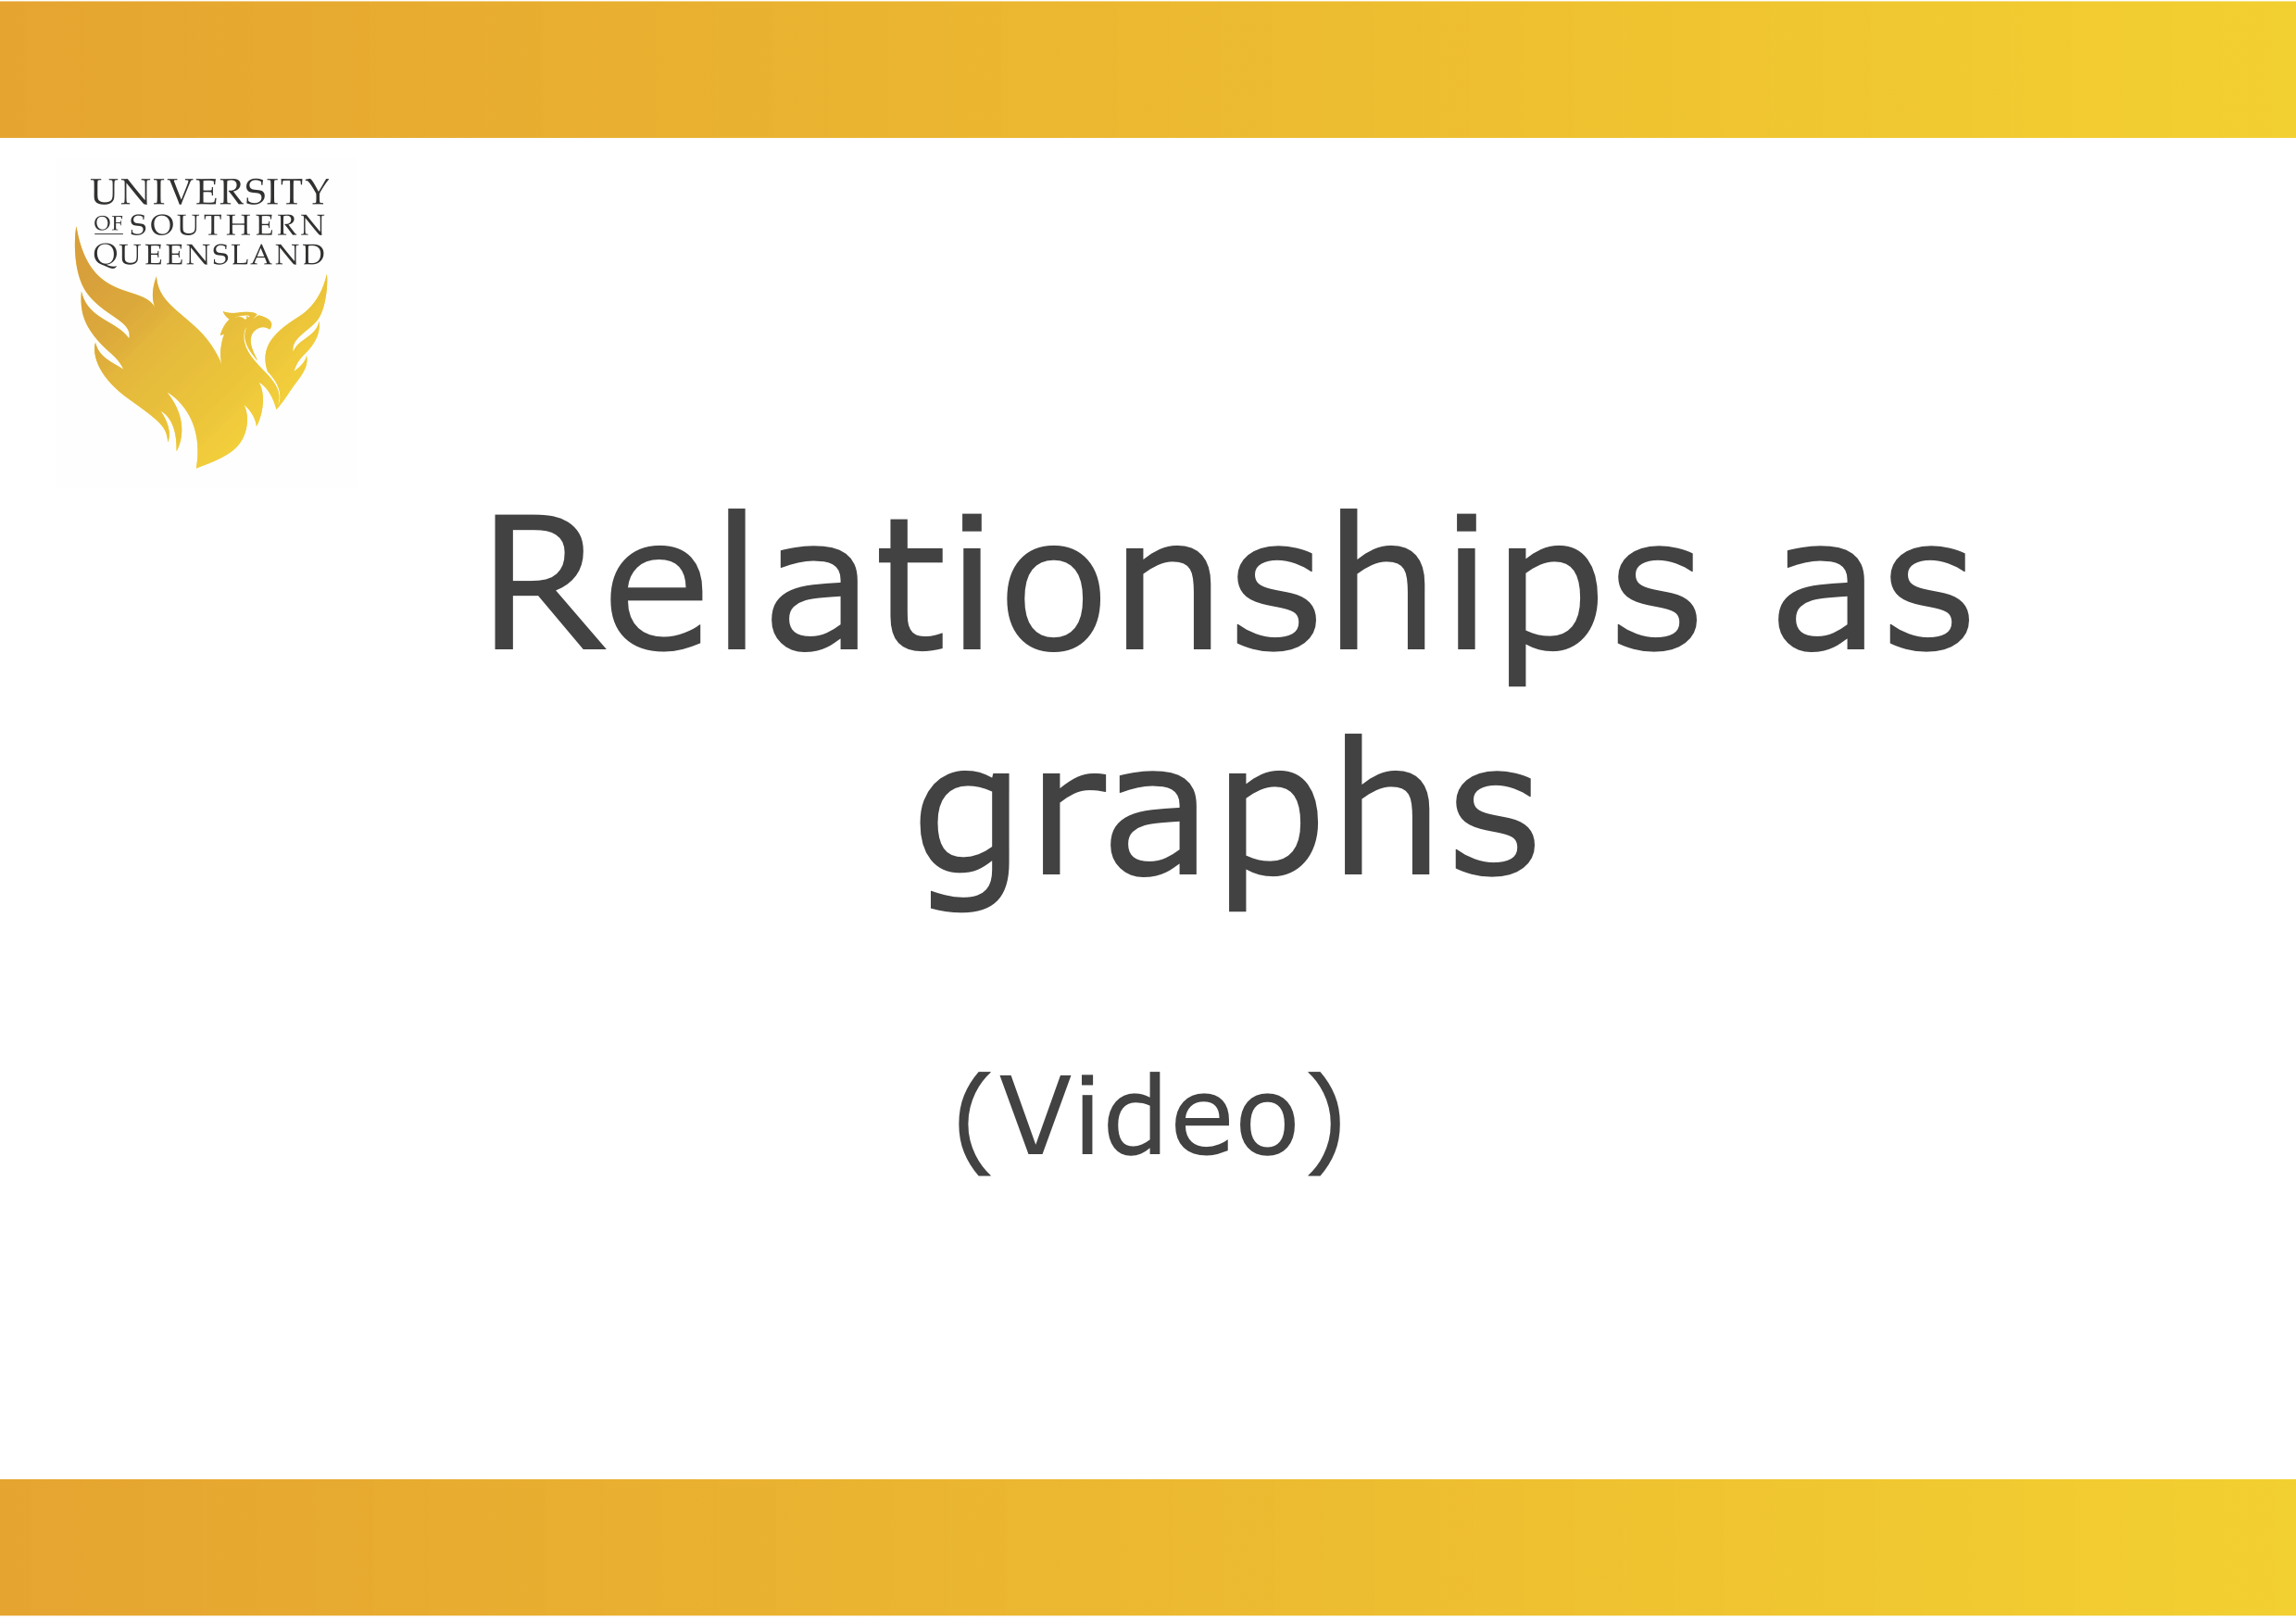 relationships as graphs image